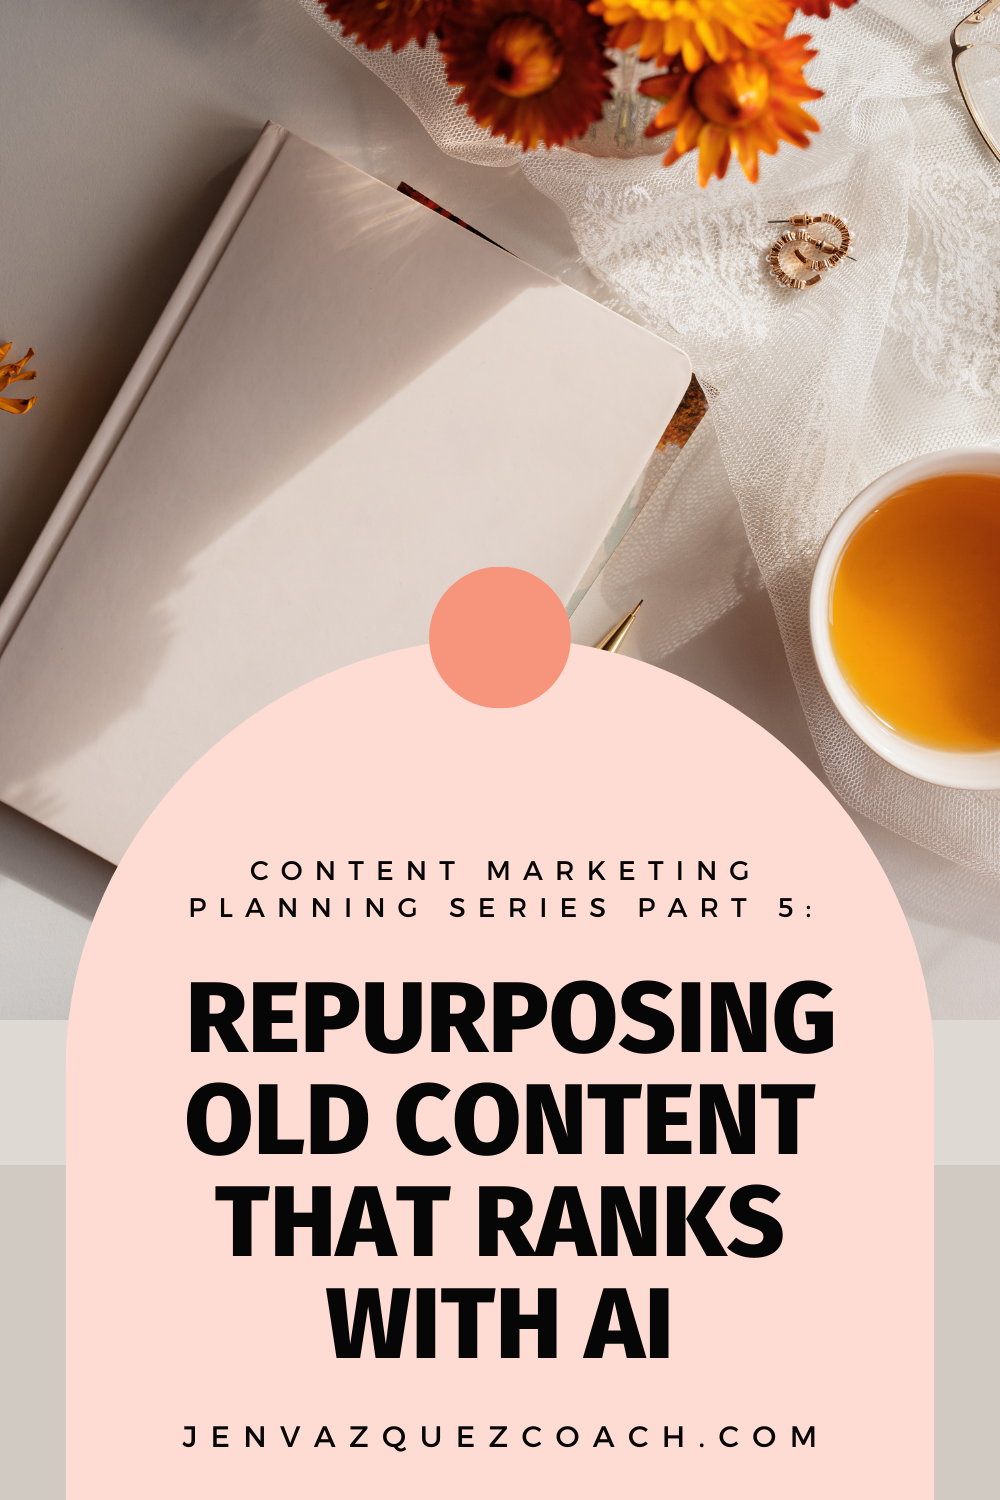 Content Marketing Planning Series Part 5 Repurposing Old Content That Ranks with Ai